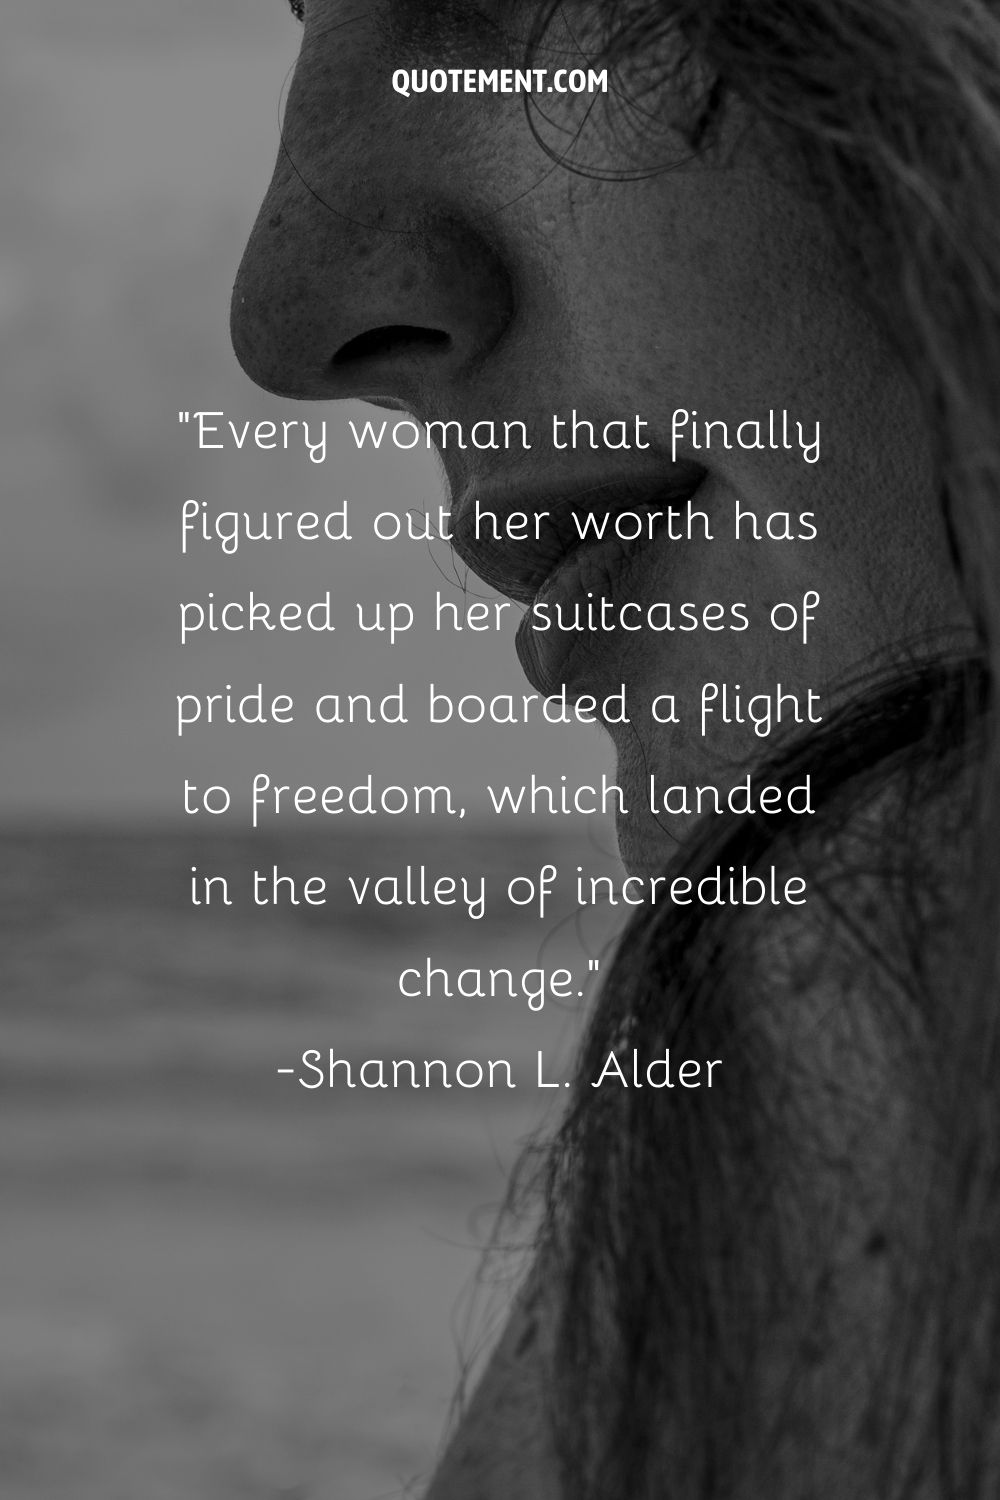 Profile view with negotiation quote representing strong woman survivor quote